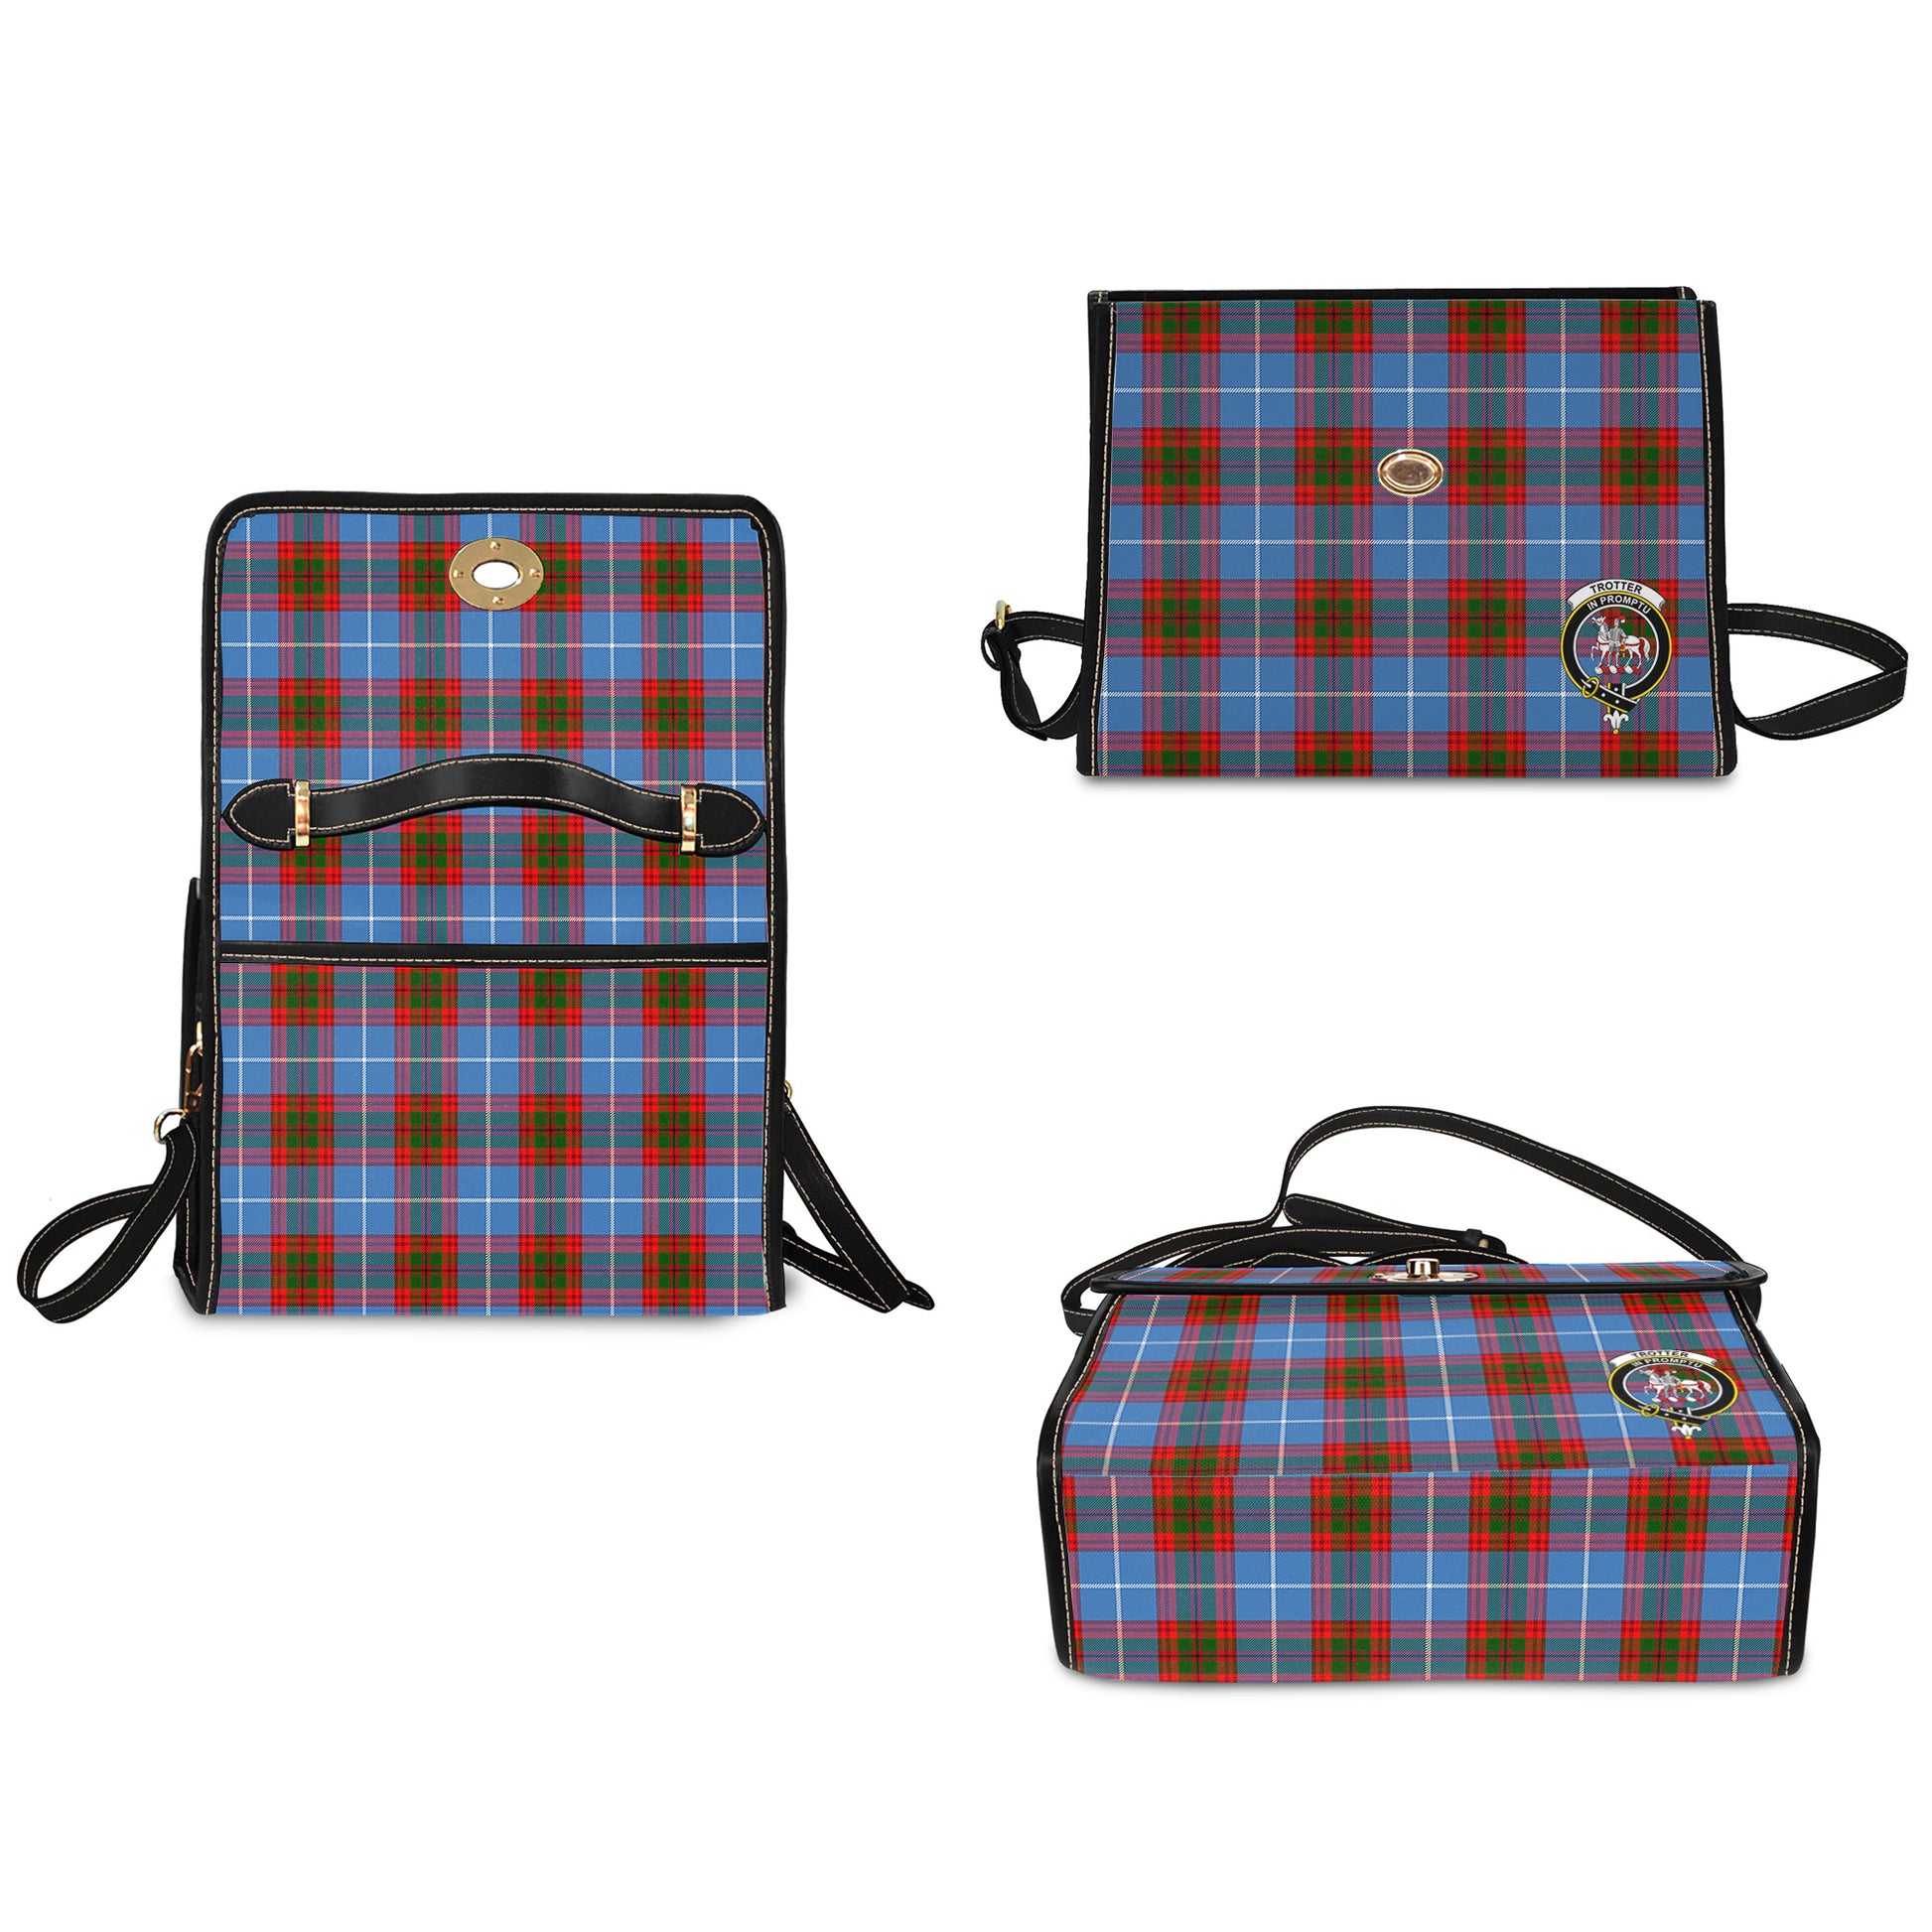 trotter-tartan-leather-strap-waterproof-canvas-bag-with-family-crest